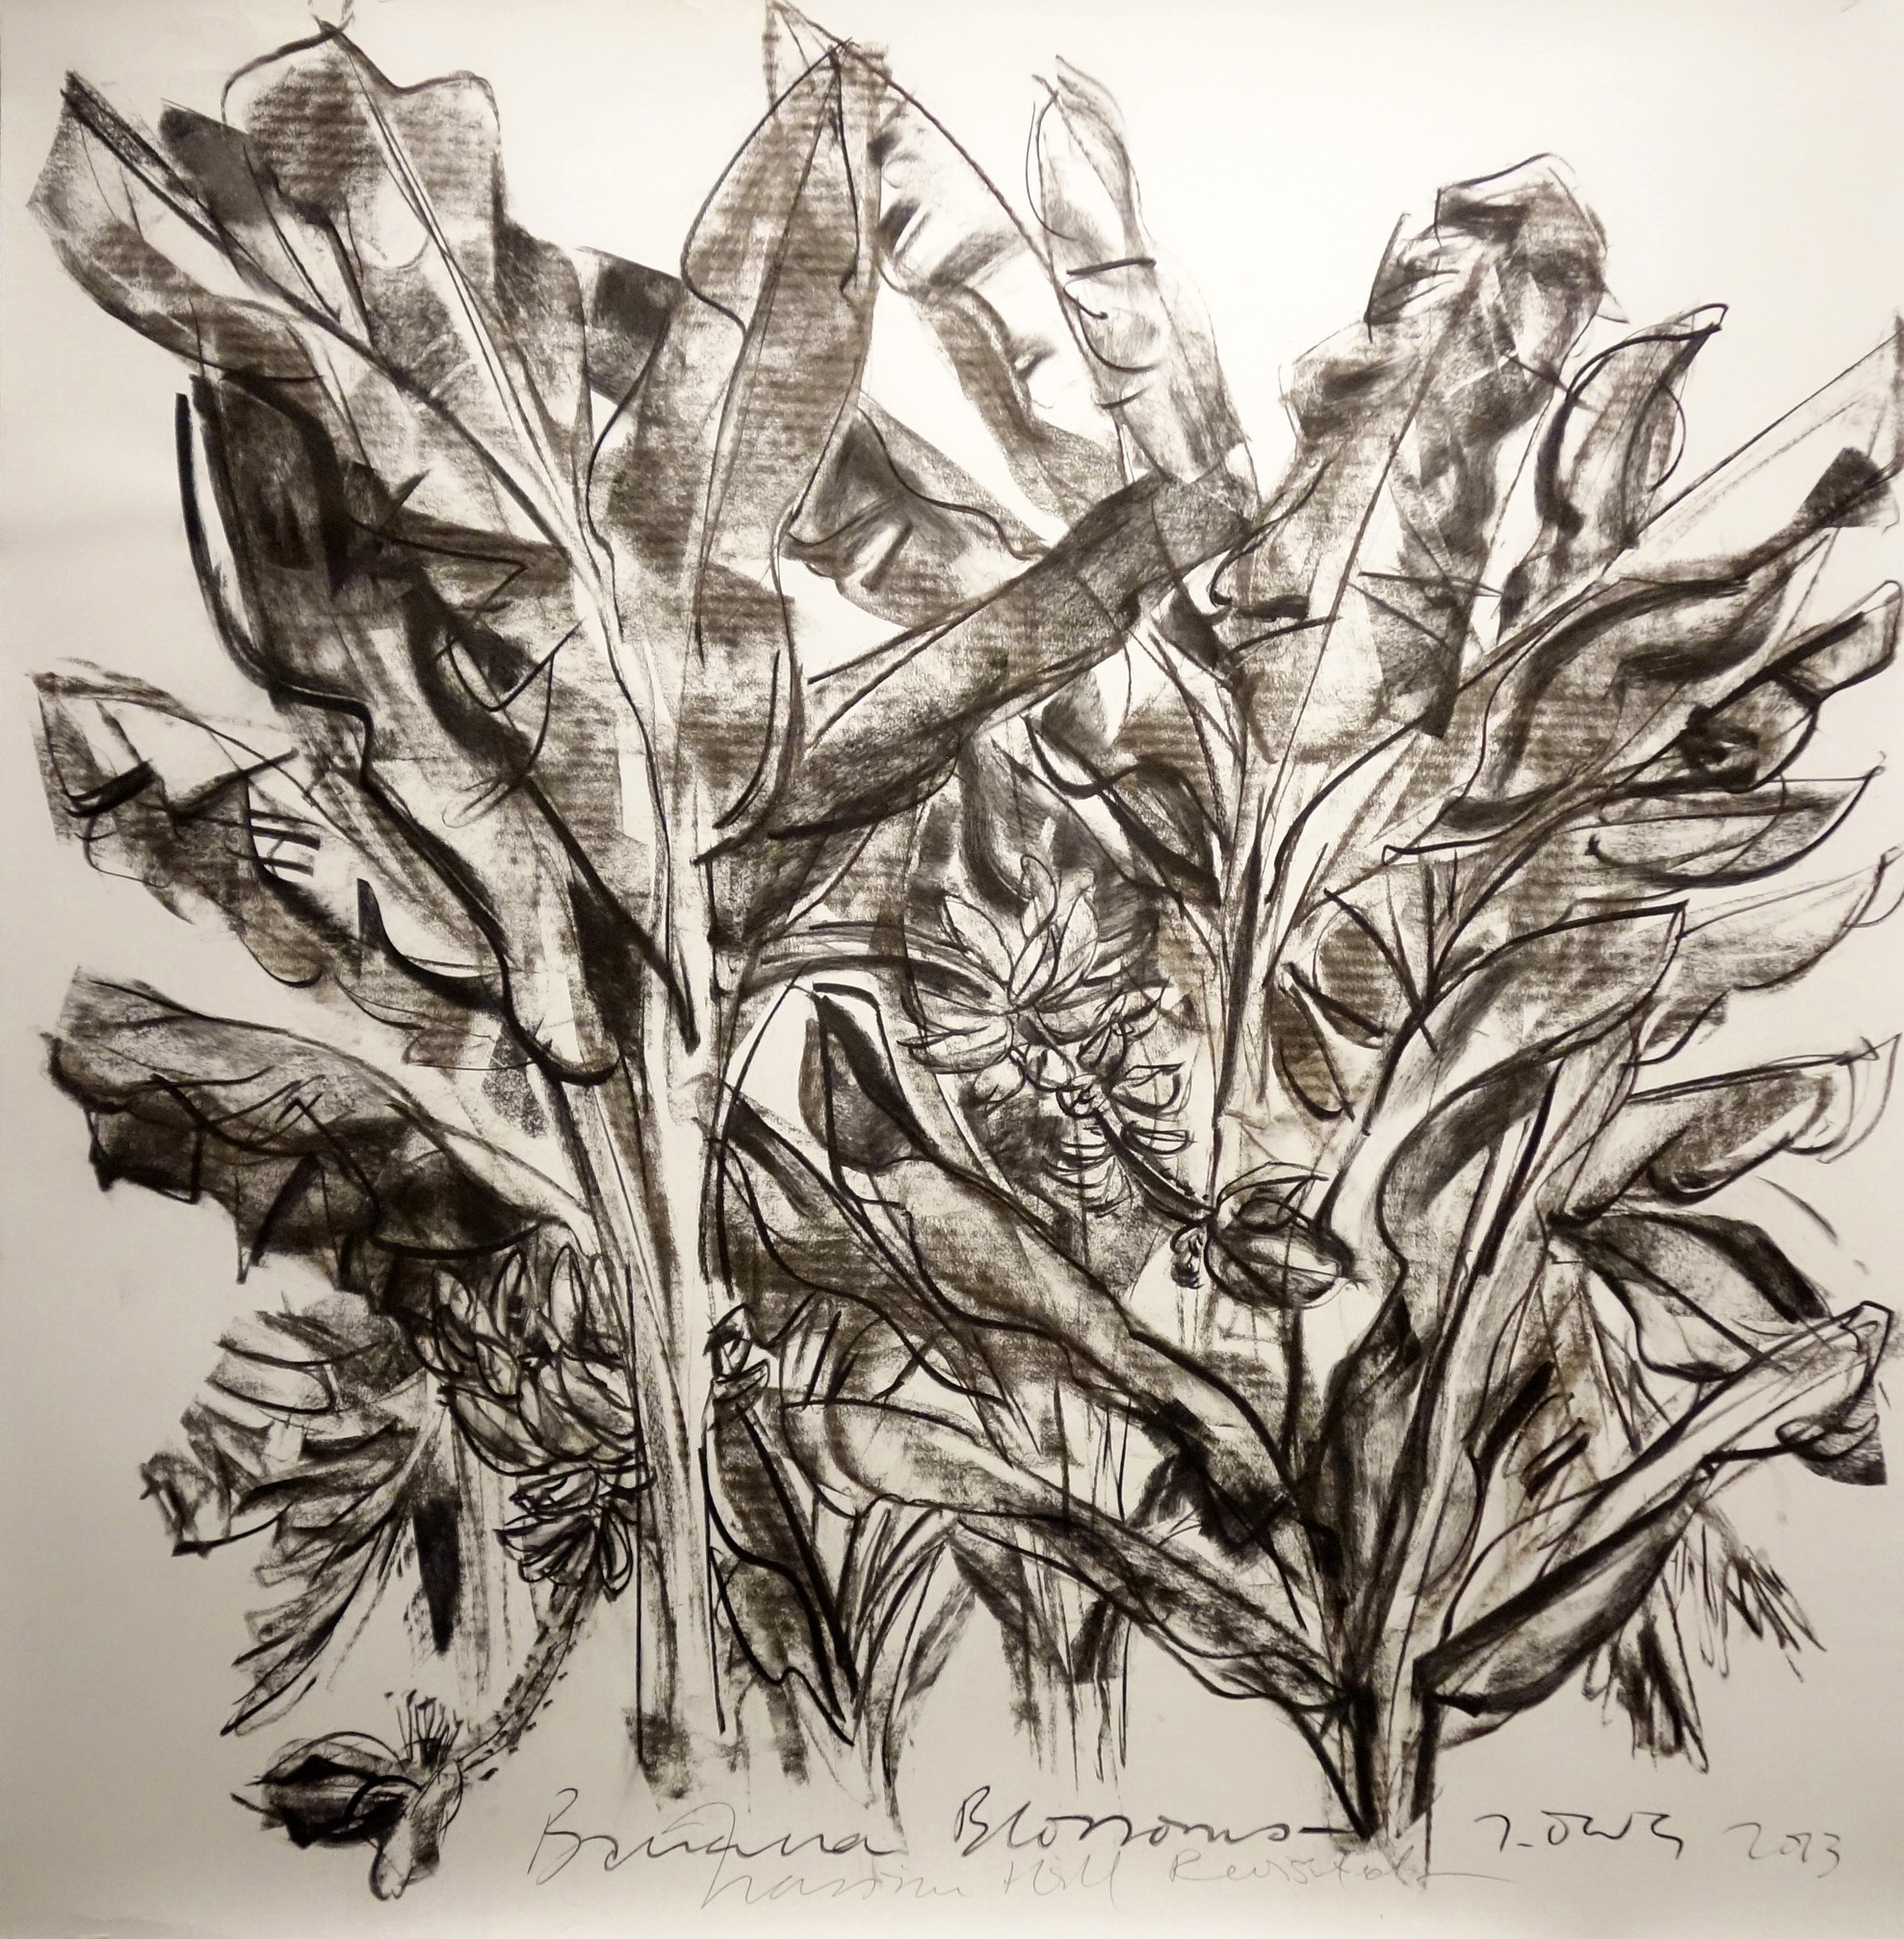   Banana Blossoms   2013 Charcoal on paper approx. H117 x W117 cm 